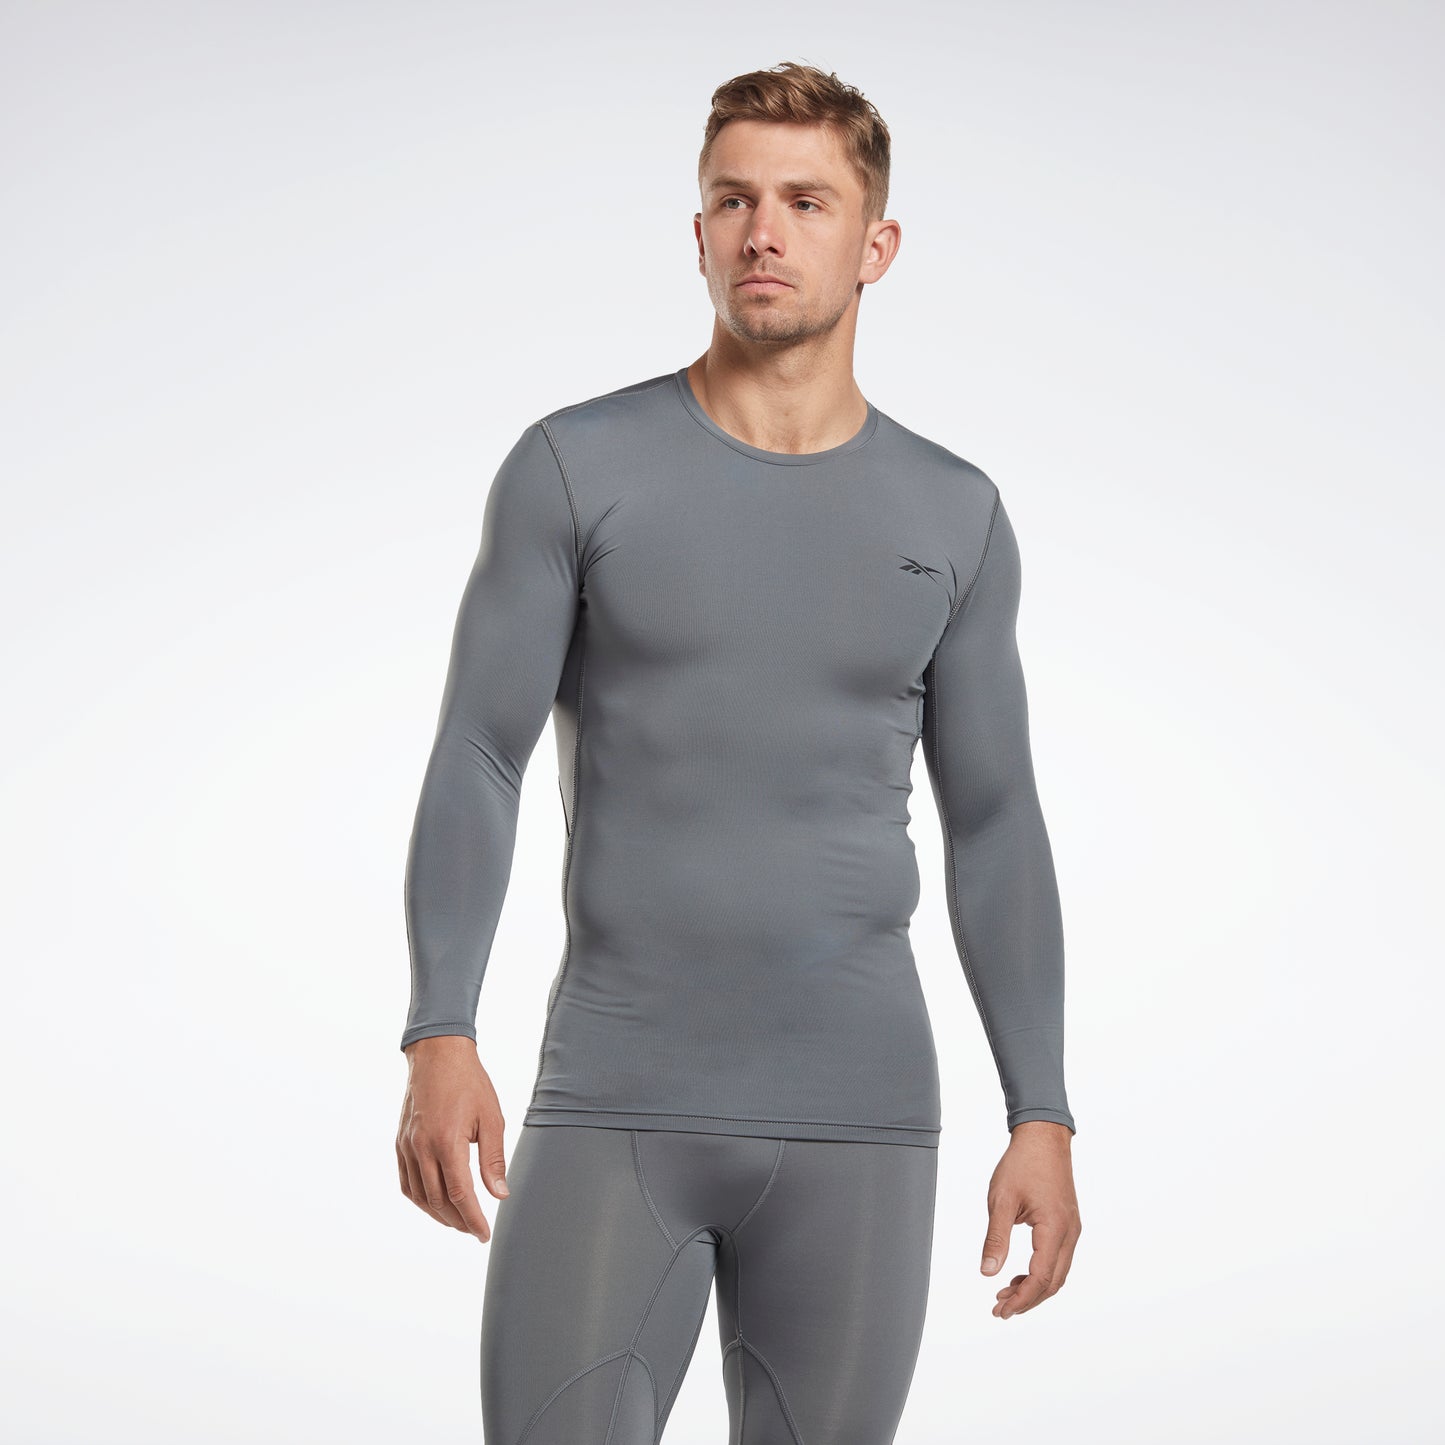 Reebok Apparel Men Workout Ready Compression Long-Sleeve Top Long-Sleeve Top Cdgry6